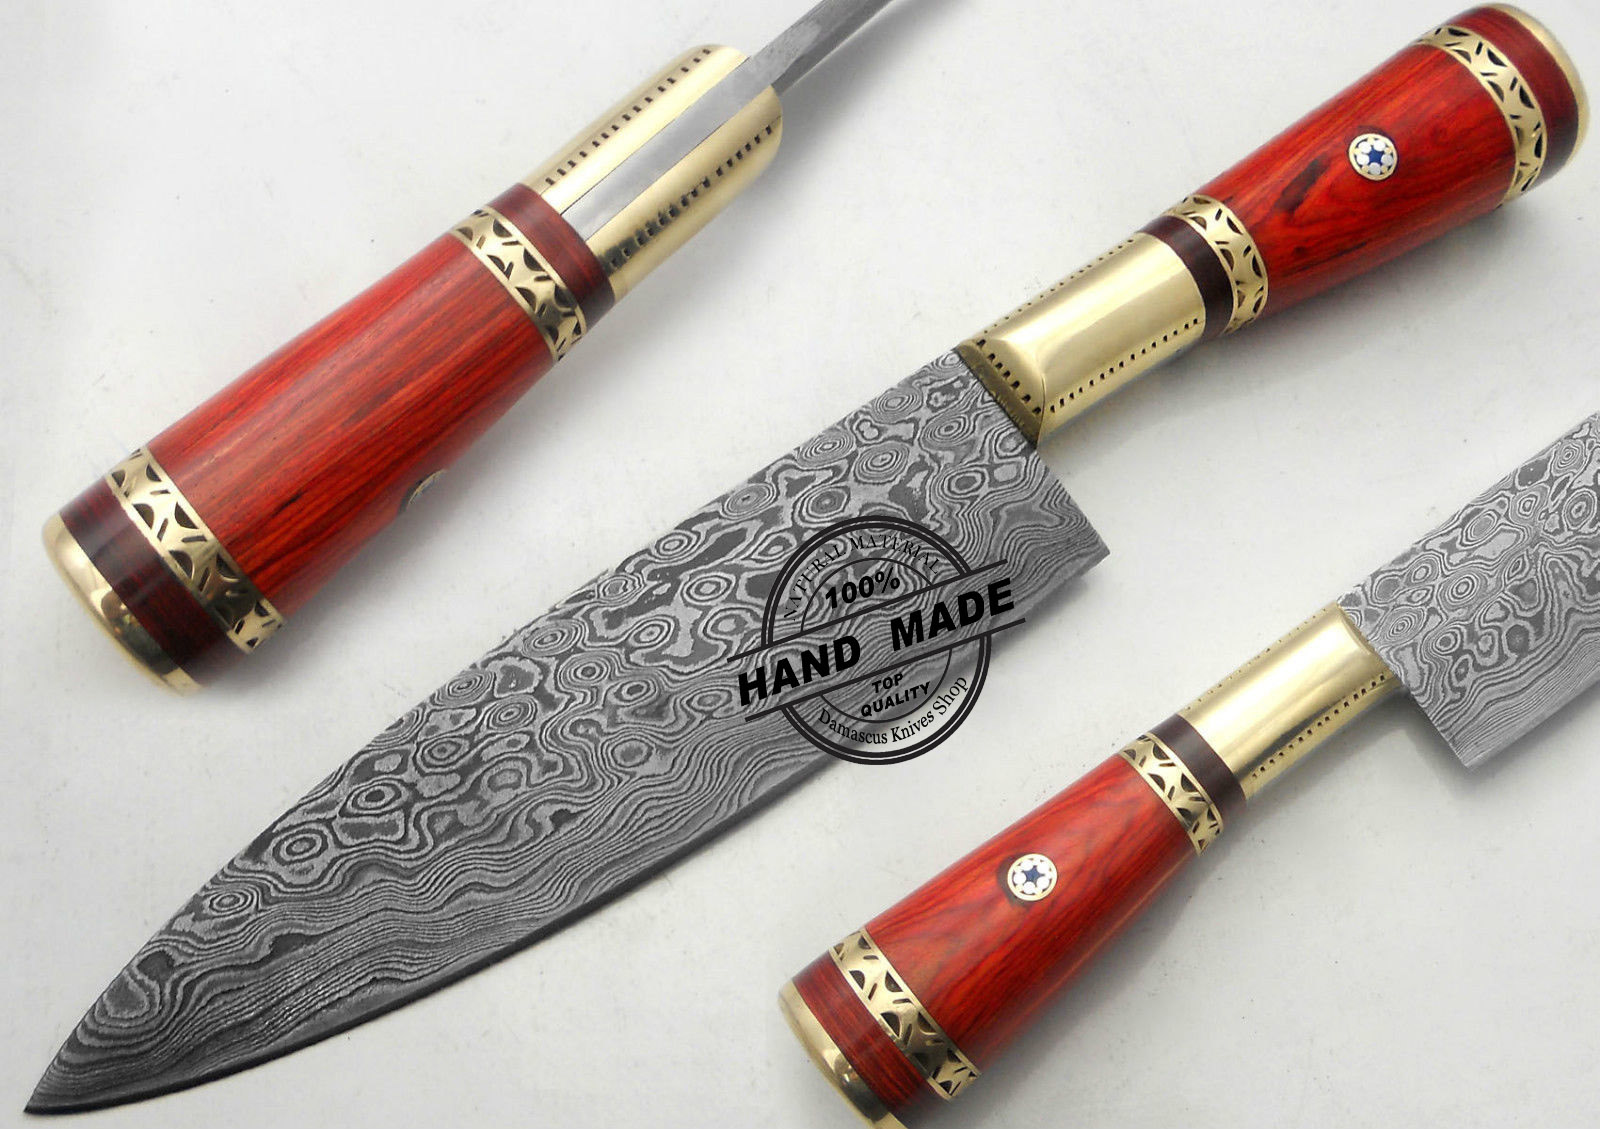 Details about  / Custom Handmade Damascus Steel Kitchen knives Set With Handle Wood /& Steel